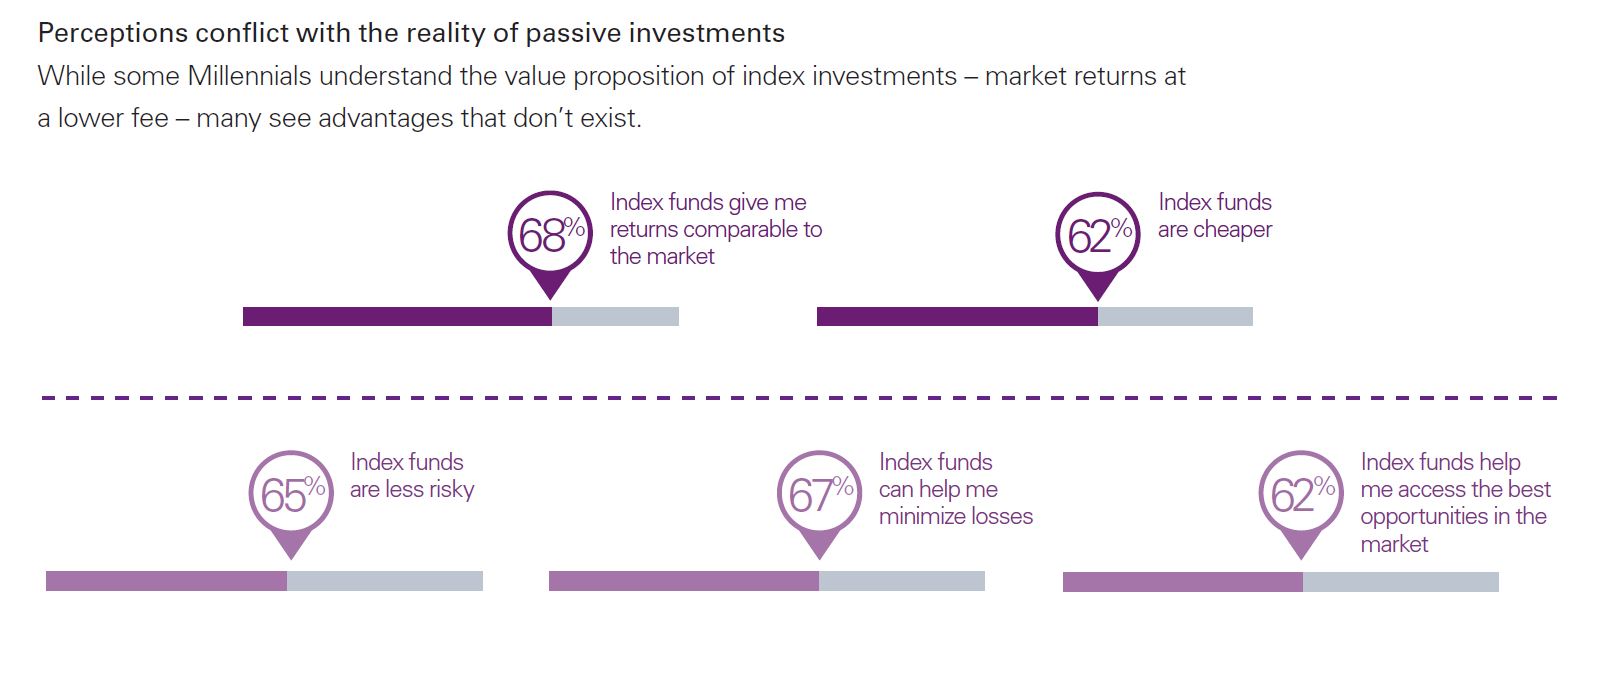 Natixis-Investment-Managers Millennials Perceptions conflict with the reality of passive investments